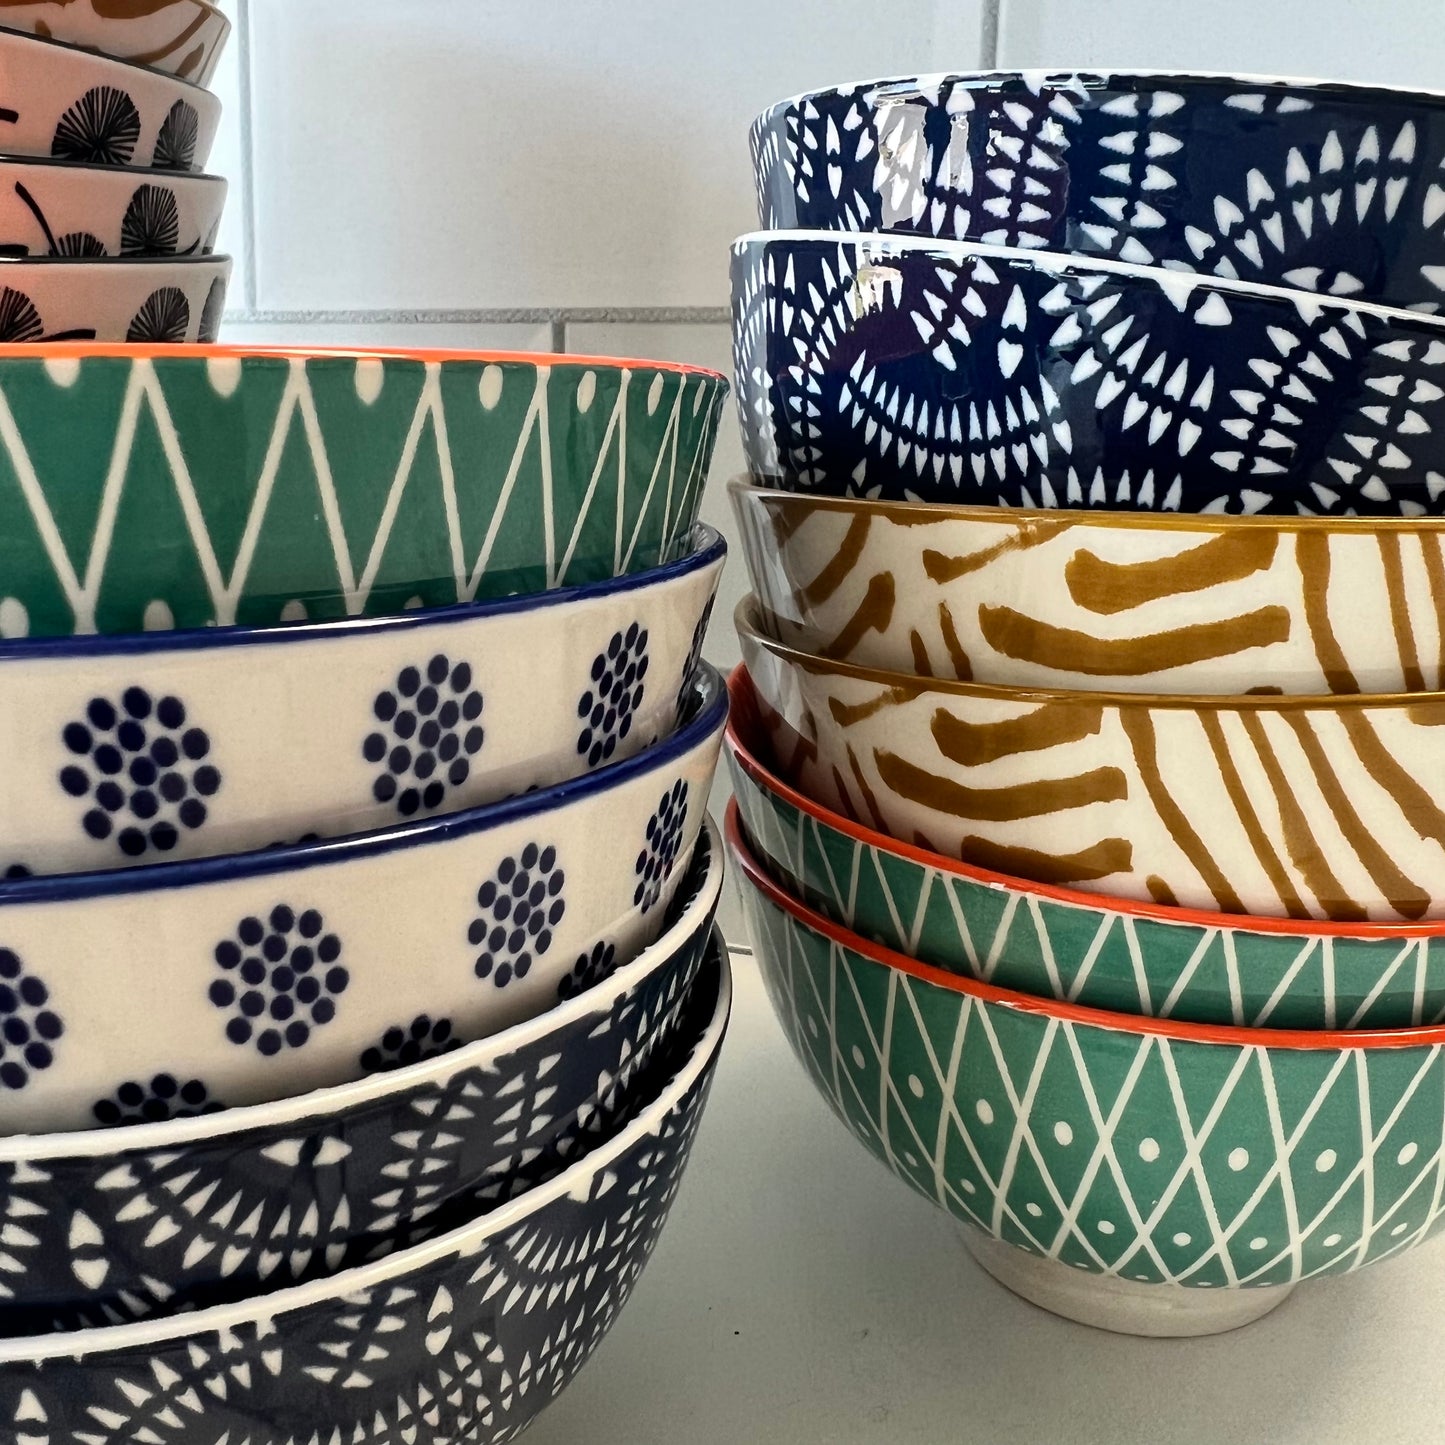 close-up of stacks of bowls on a countertop.